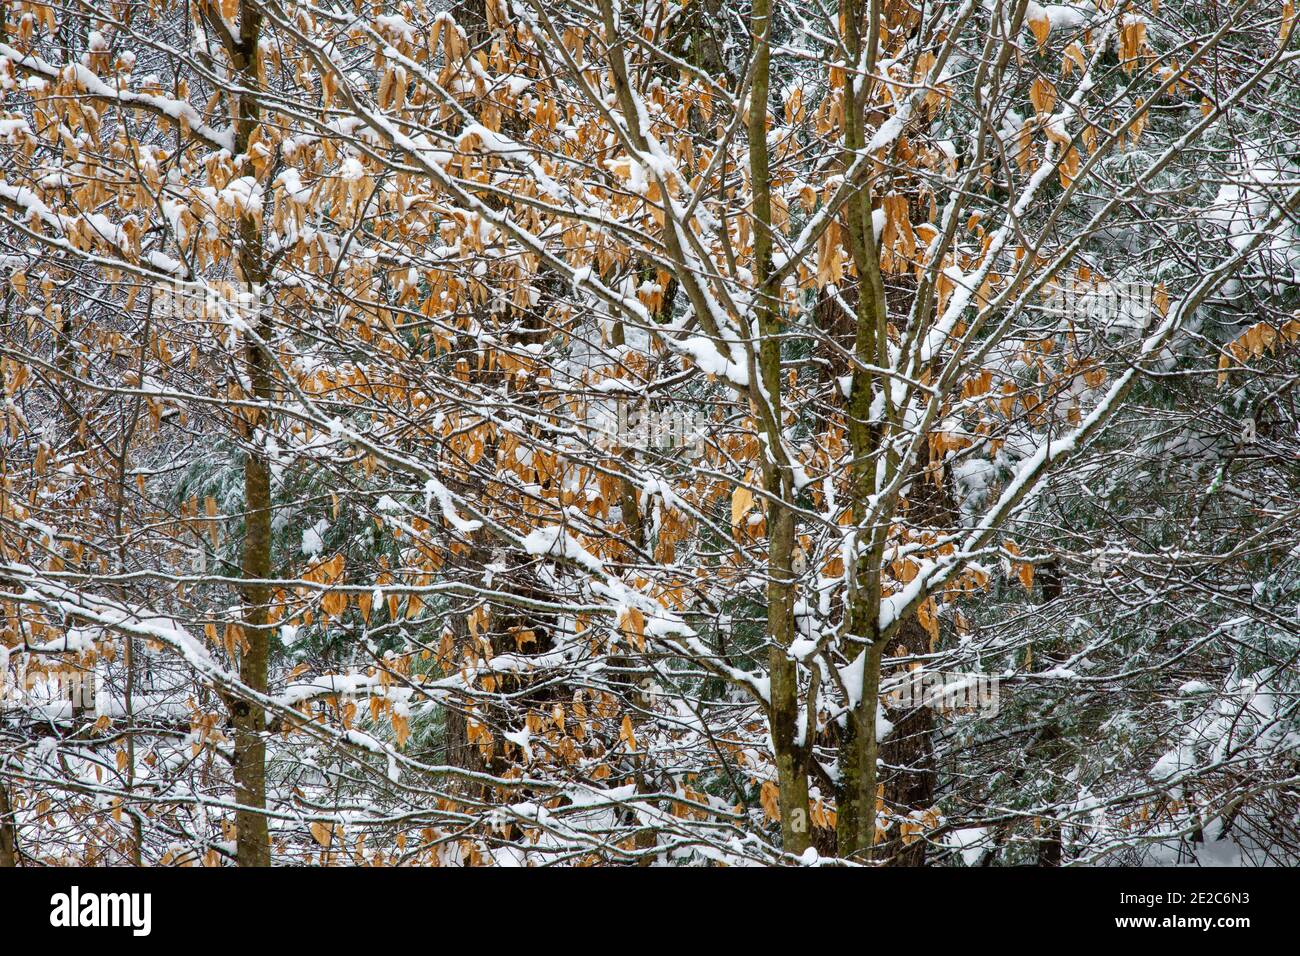 A fresh snowfall blankets the forest in the Delaware State Forest, Pennsylvania Stock Photo